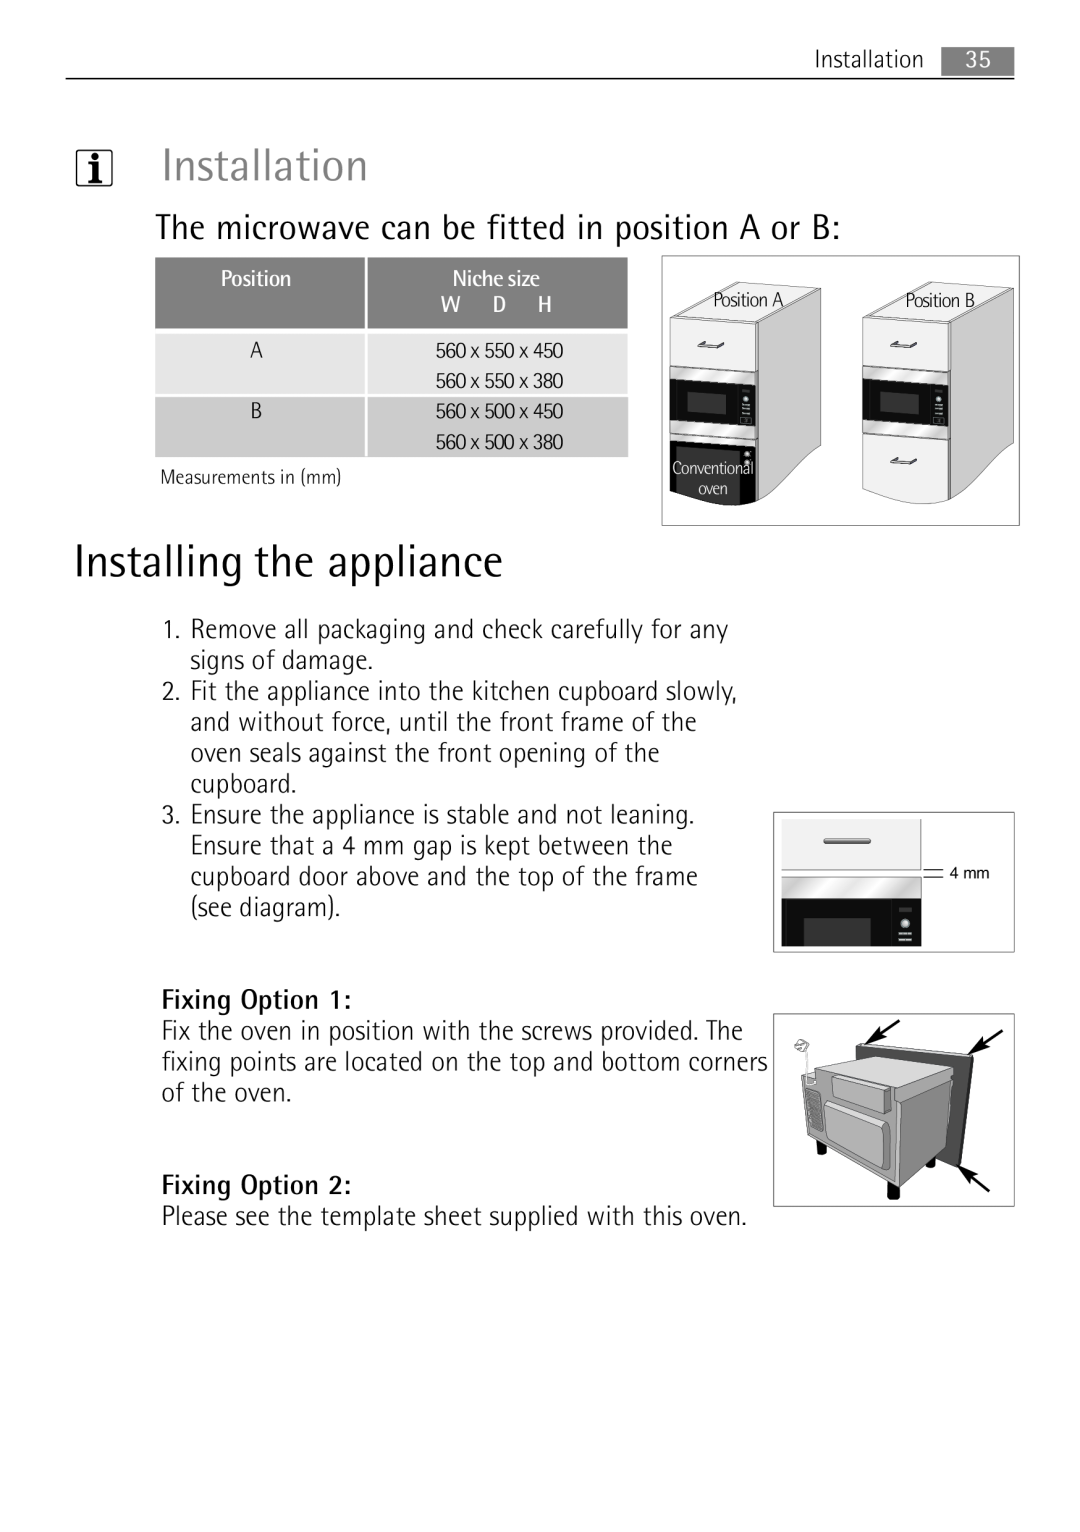 AEG MCD2662E Installation, Installing the appliance, The microwave can be fitted in position A or B, Fixing Option 